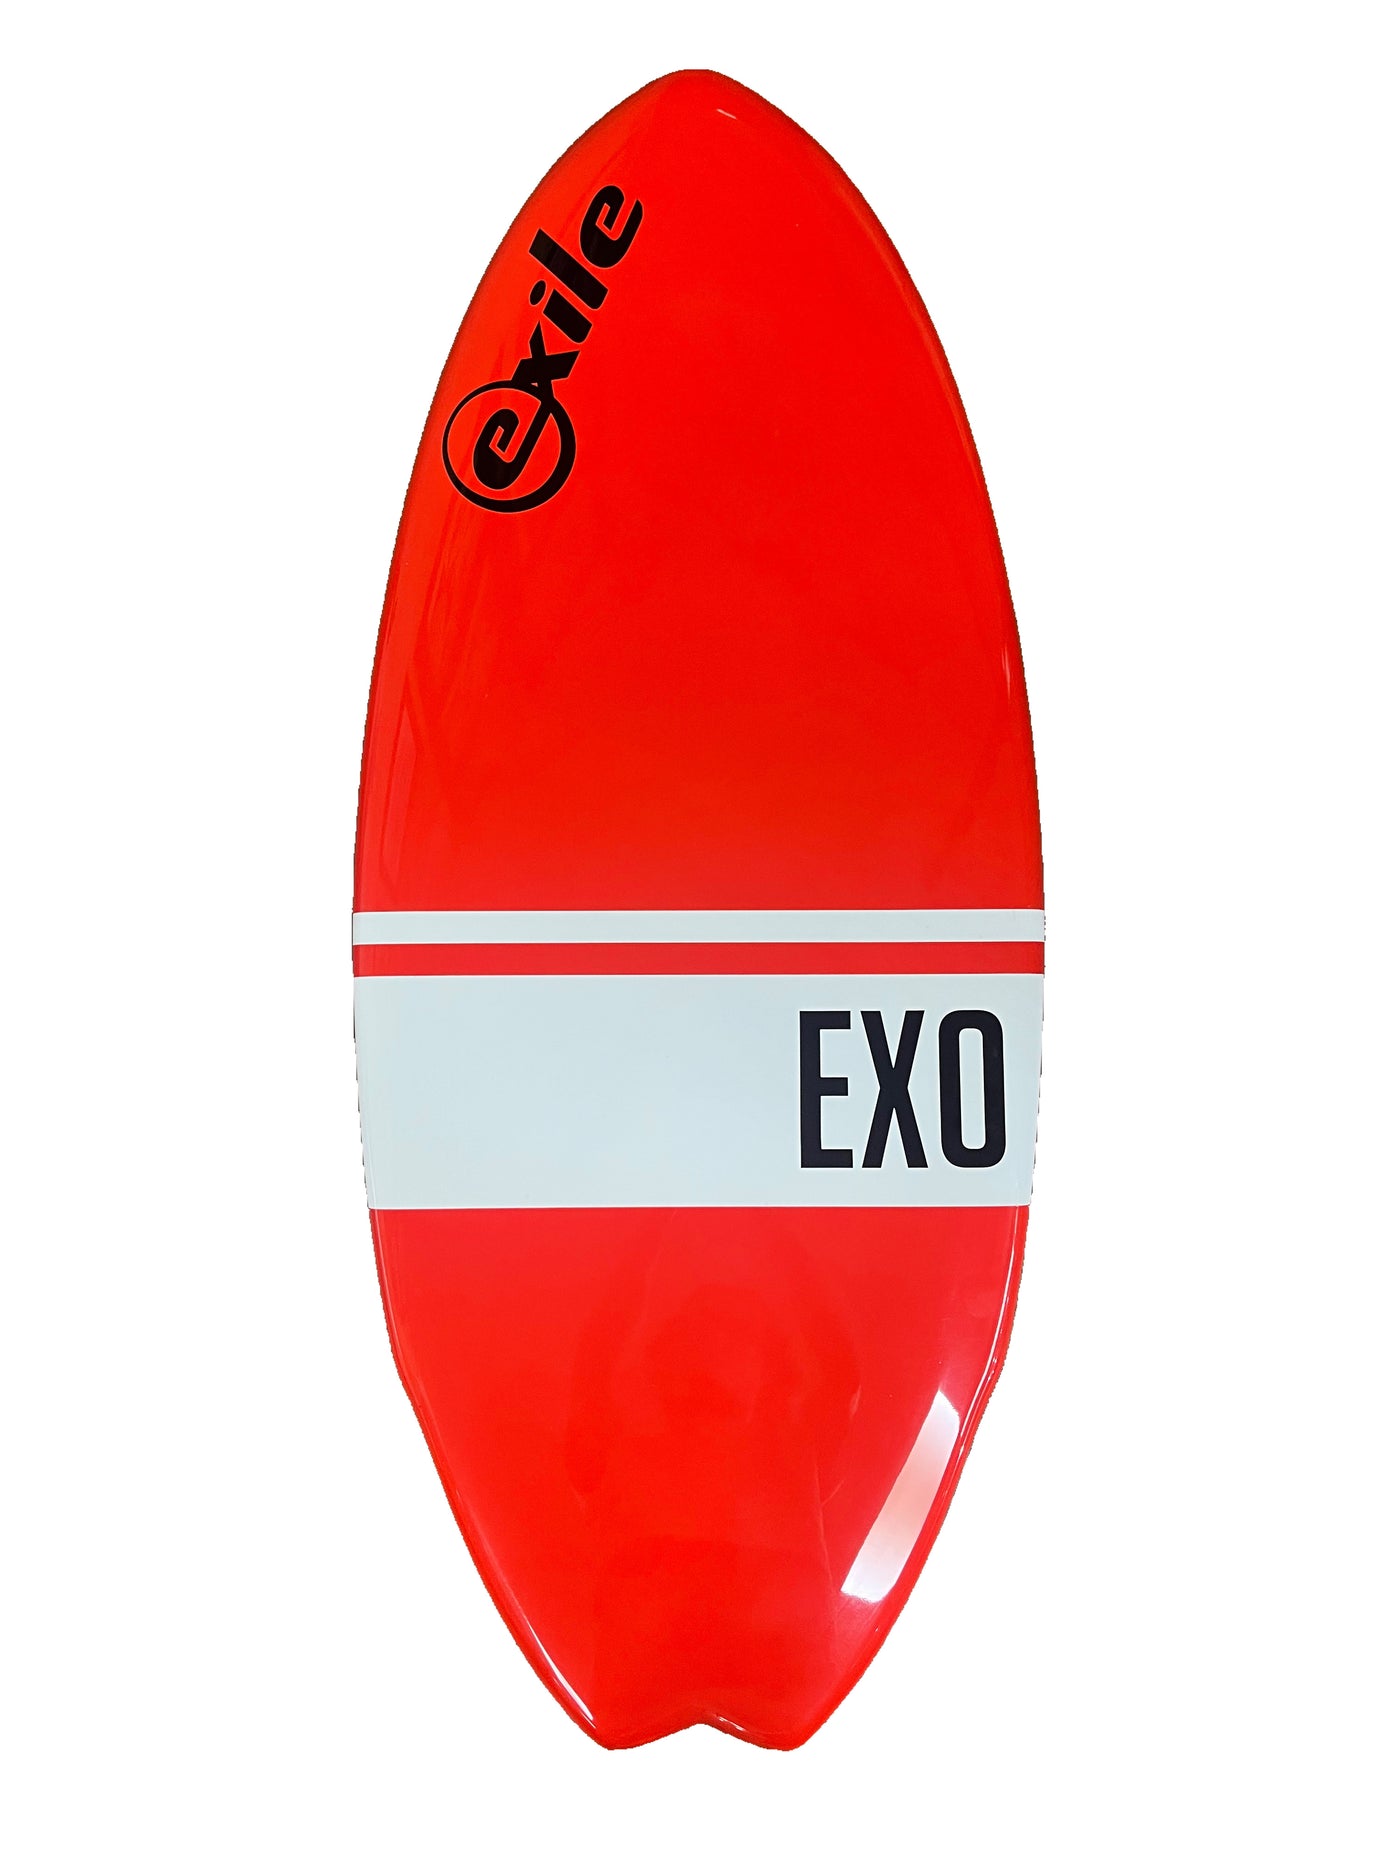 Exile Med 48" Dude! Cruise EX0 (Red)